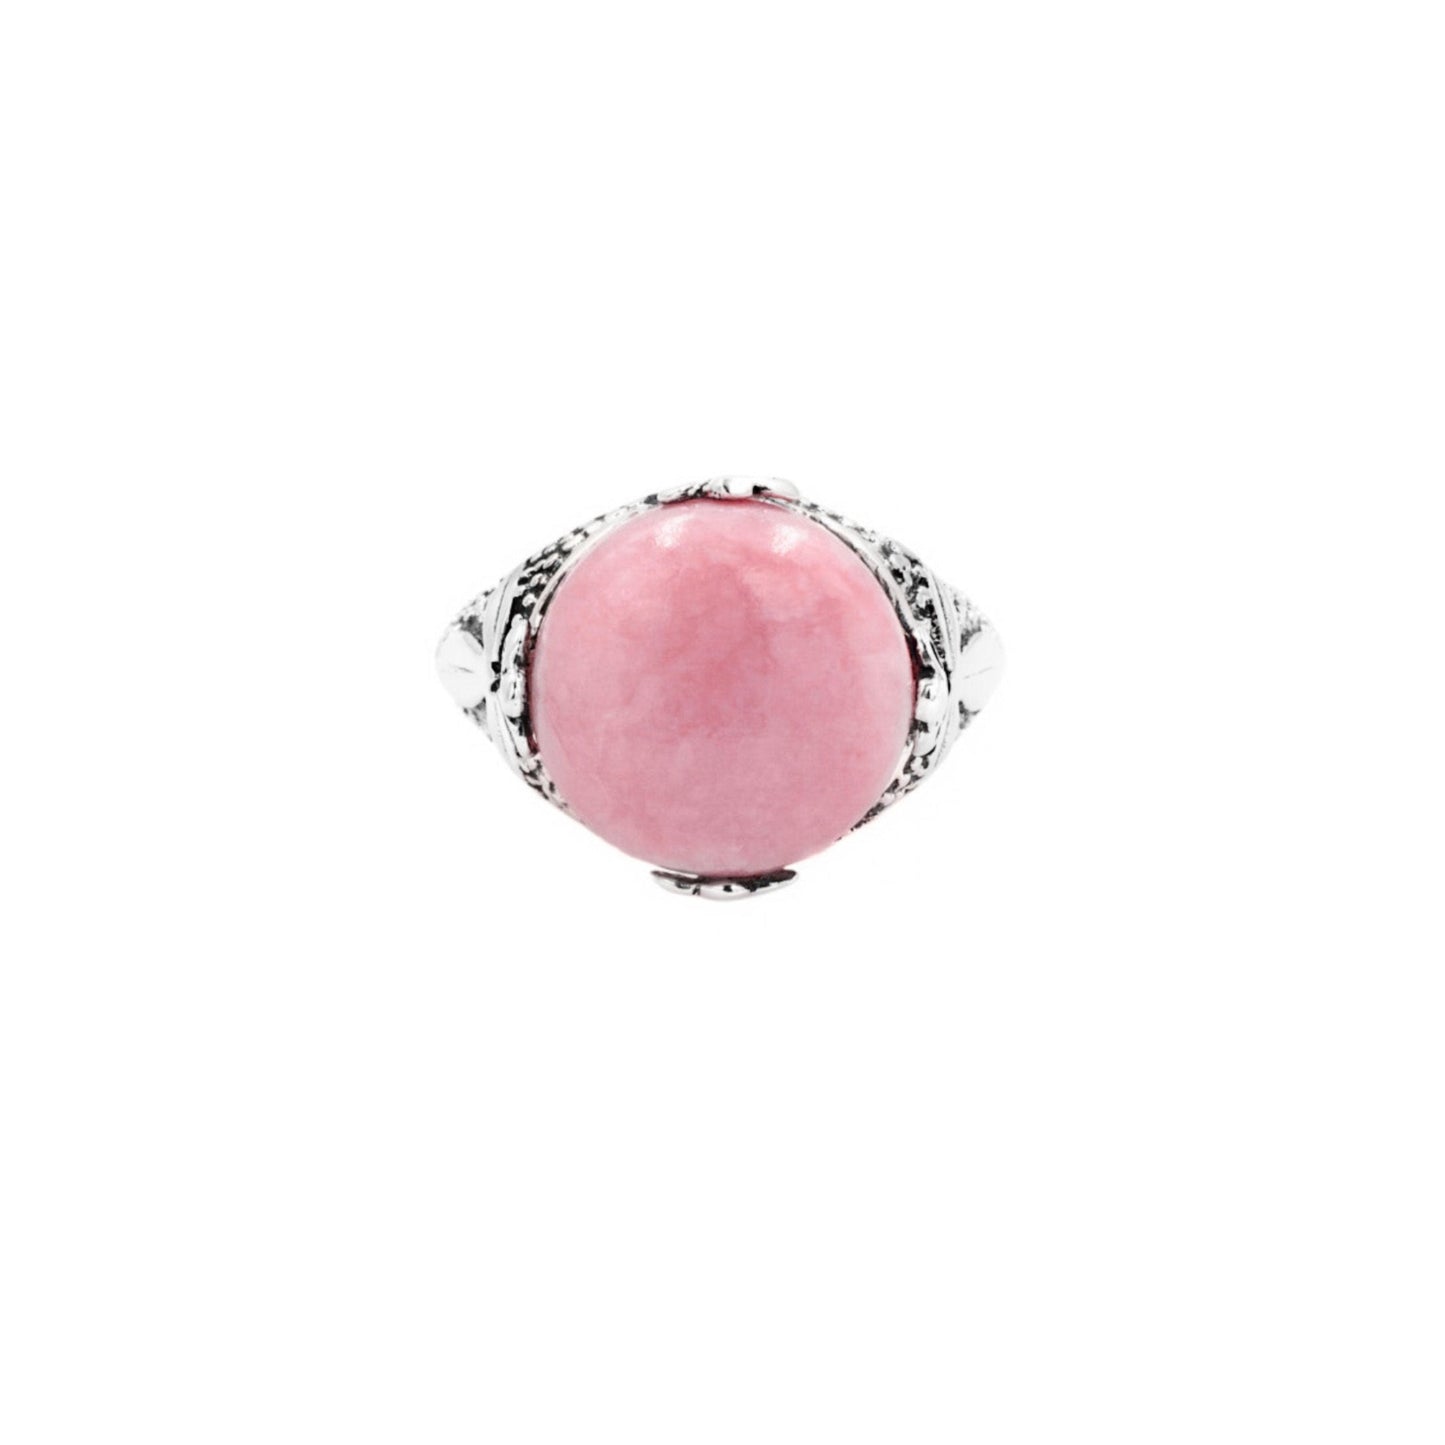 Peruvian Pink Opal Sterling Silver Ring